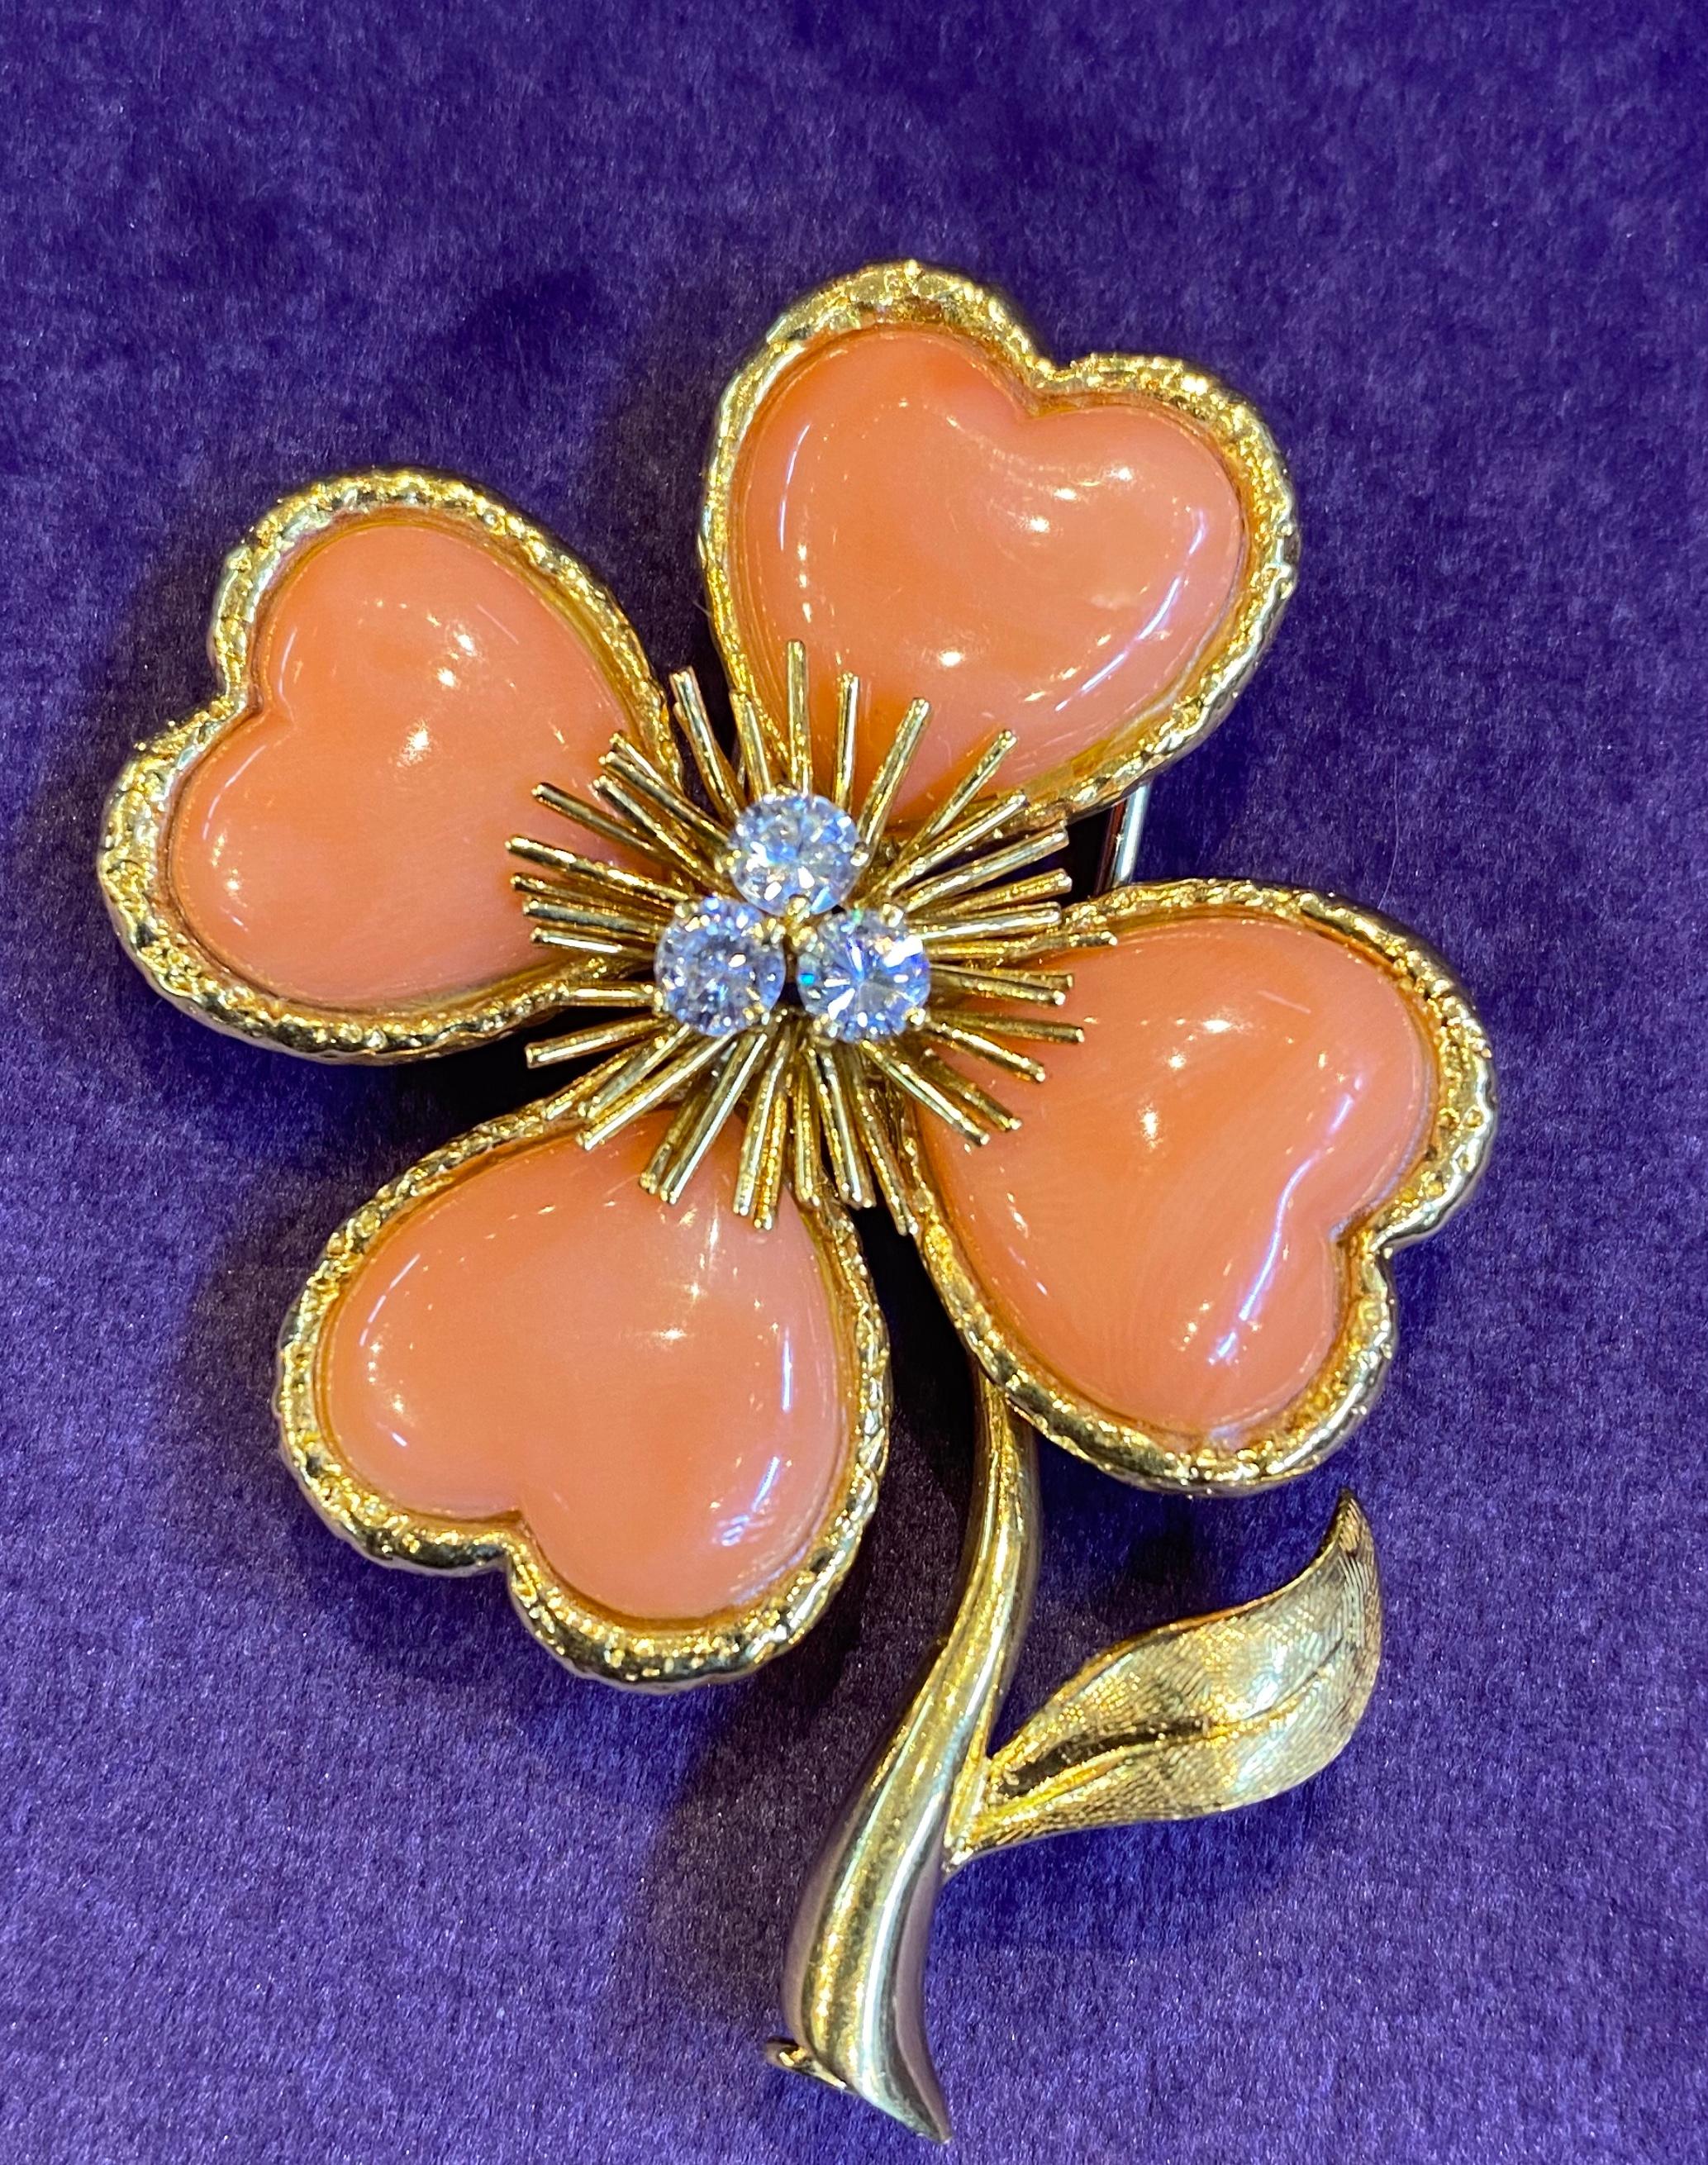 Van Cleef & Arpels Coral & Diamond Clover Flower Brooch 
3 round cut diamonds
Measurements: 2” long 
Signed Van Cleef & Arpels and serial numbered
Gold Type: 18K Yellow Gold
